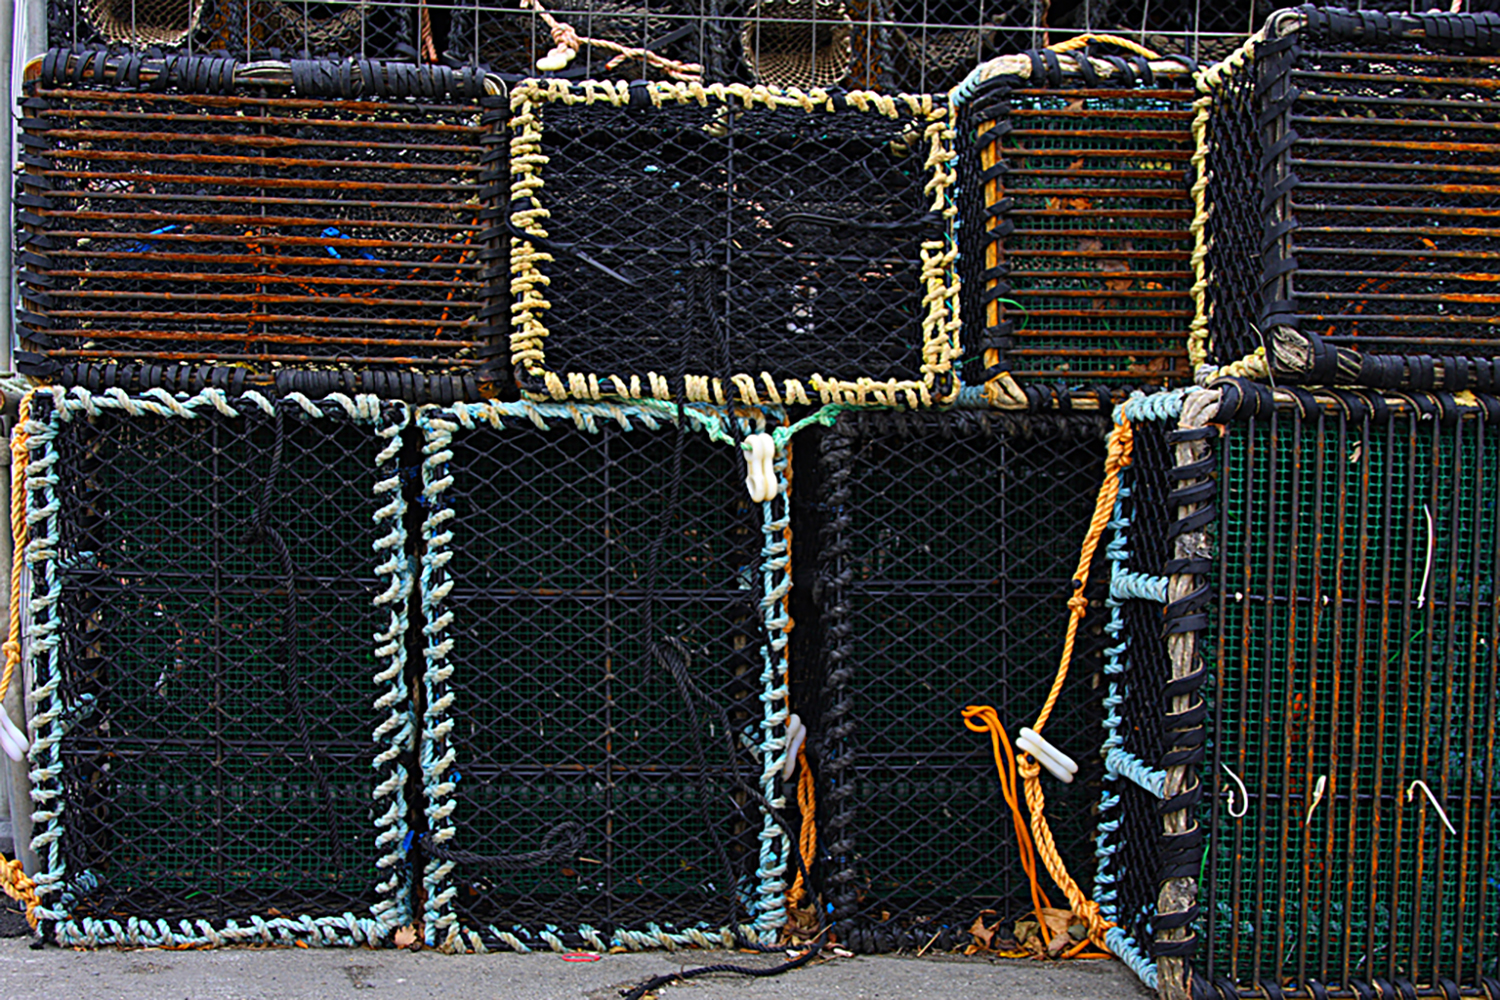 Crab and Lobster baskets at Aberystwyth Harbour